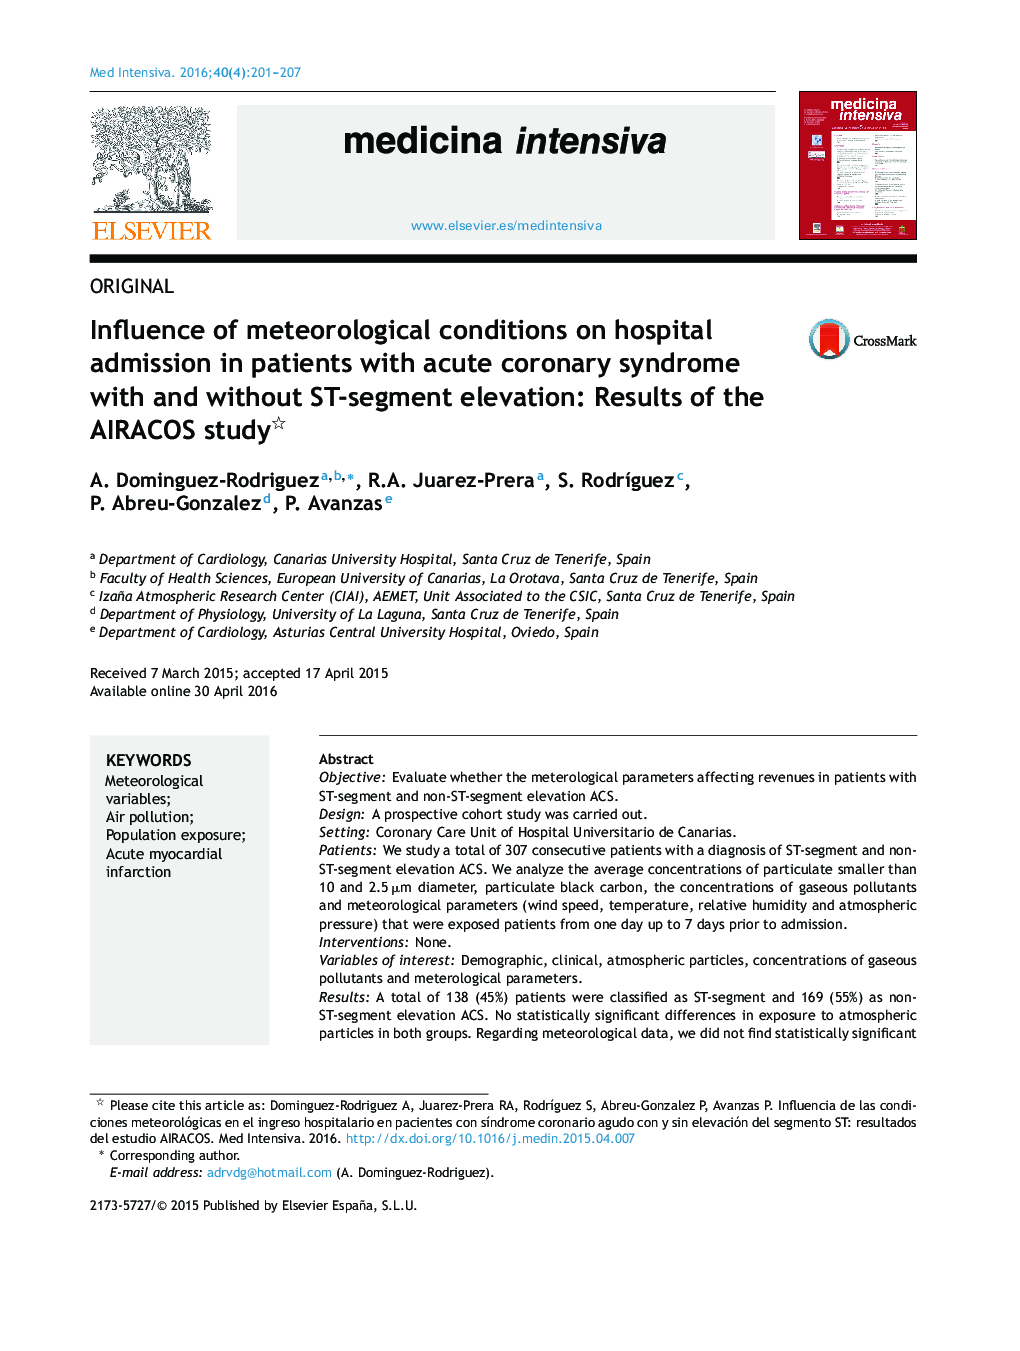 Influence of meteorological conditions on hospital admission in patients with acute coronary syndrome with and without ST-segment elevation: Results of the AIRACOS study 